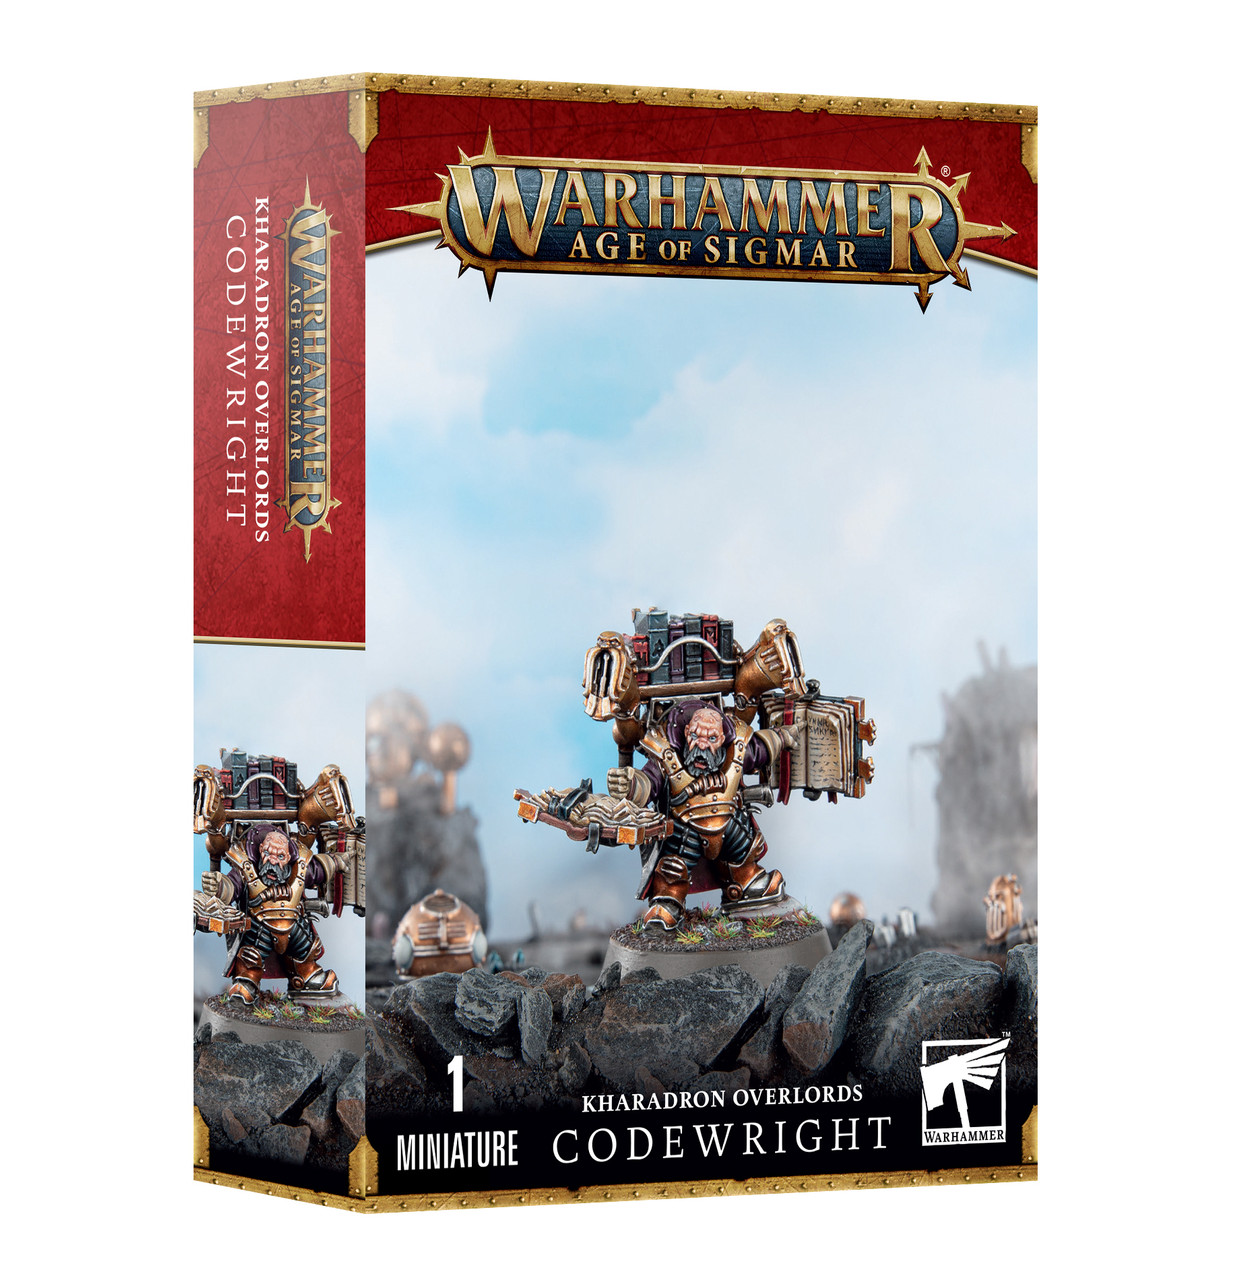 GW84-61 KHARADRON OVERLORDS: CODEWRIGHT